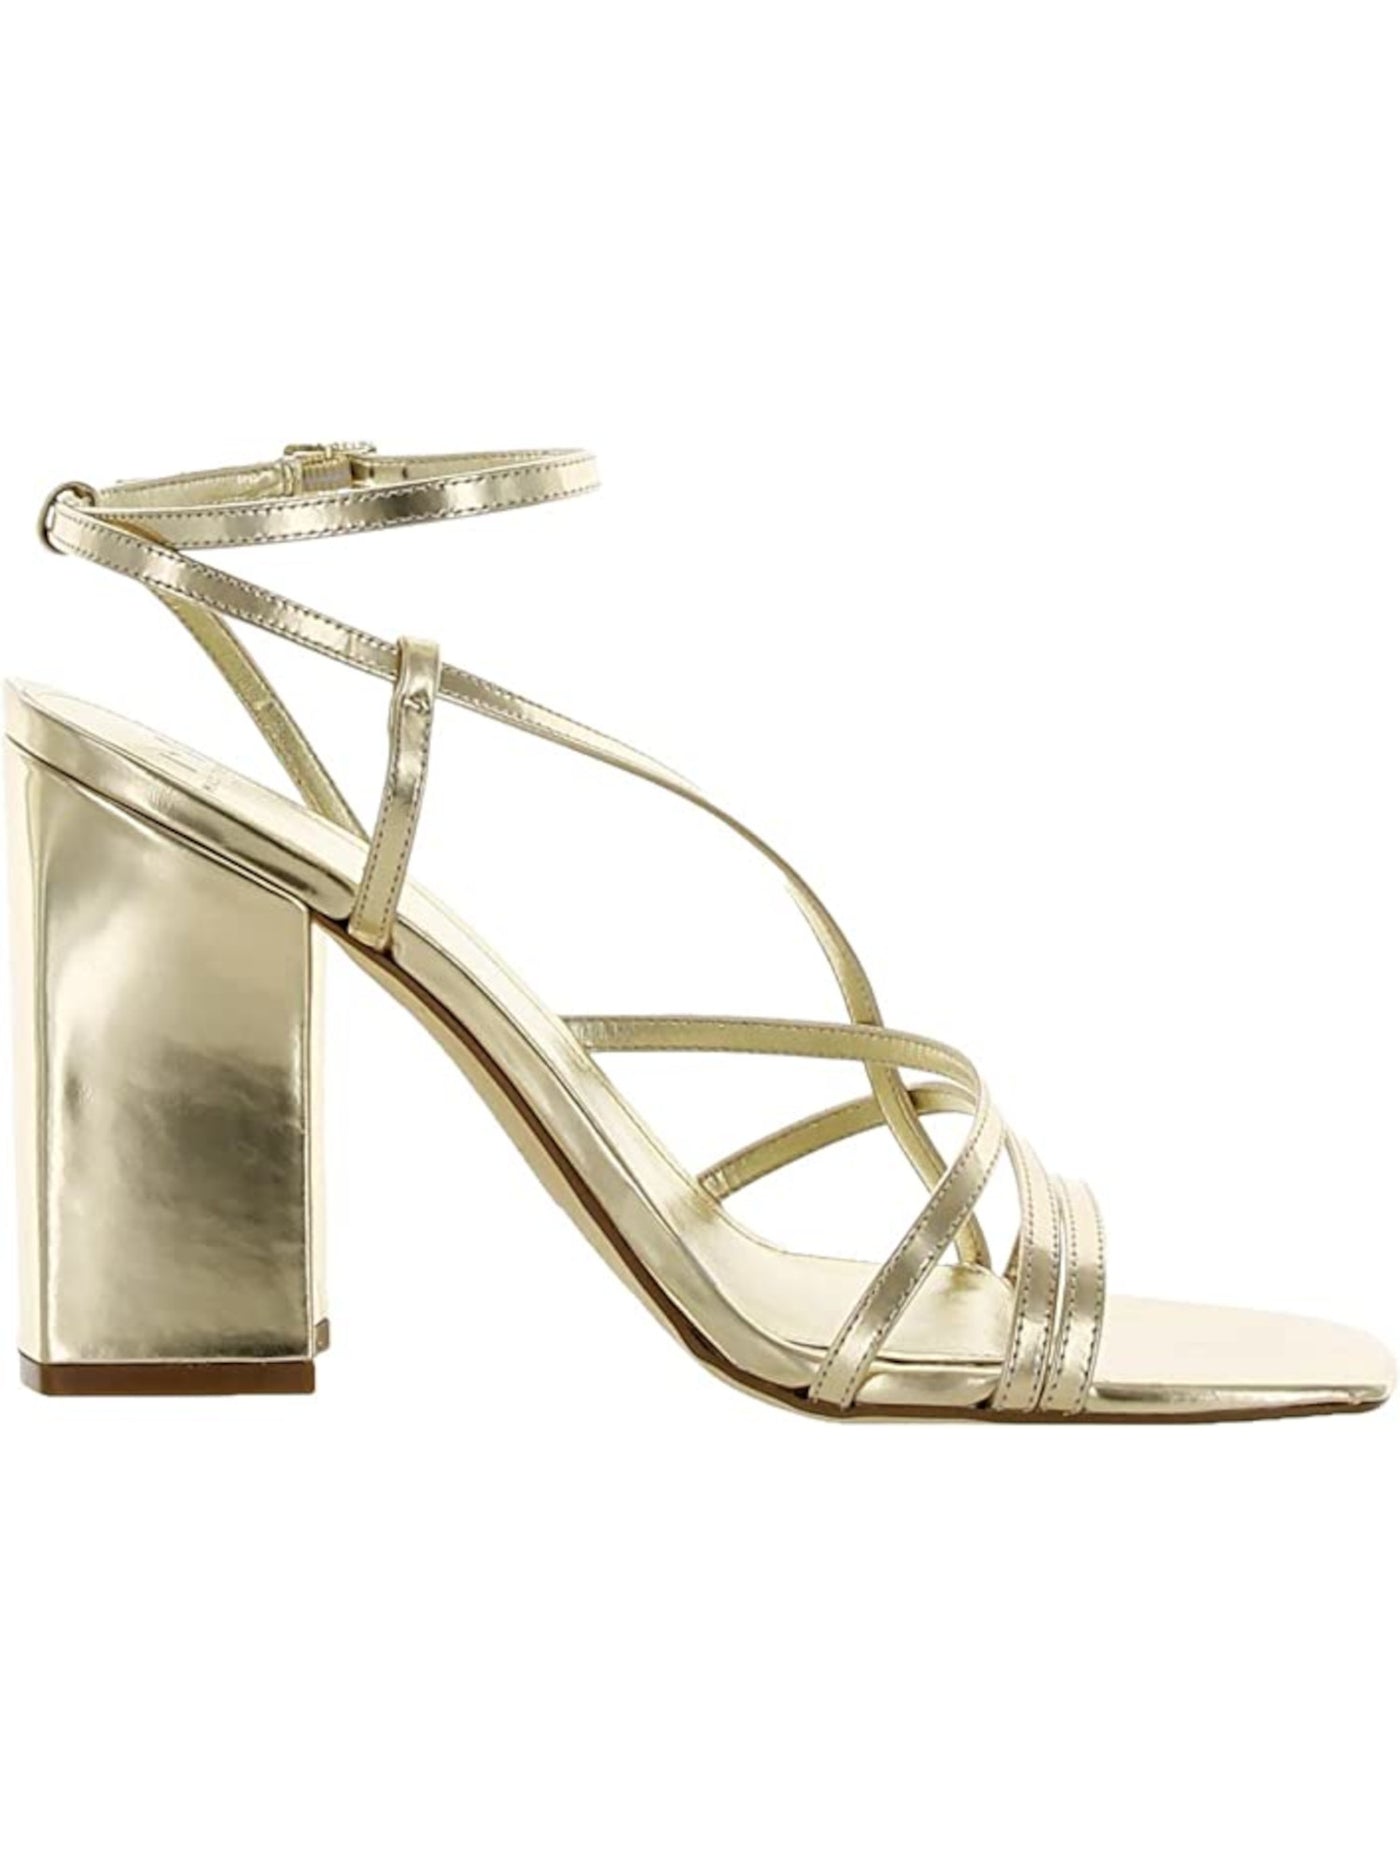 MARC FISHER Womens Gold Padded Ankle Strap Edalyn Square Toe Block Heel Buckle Leather Dress Heeled Sandal 6.5 M